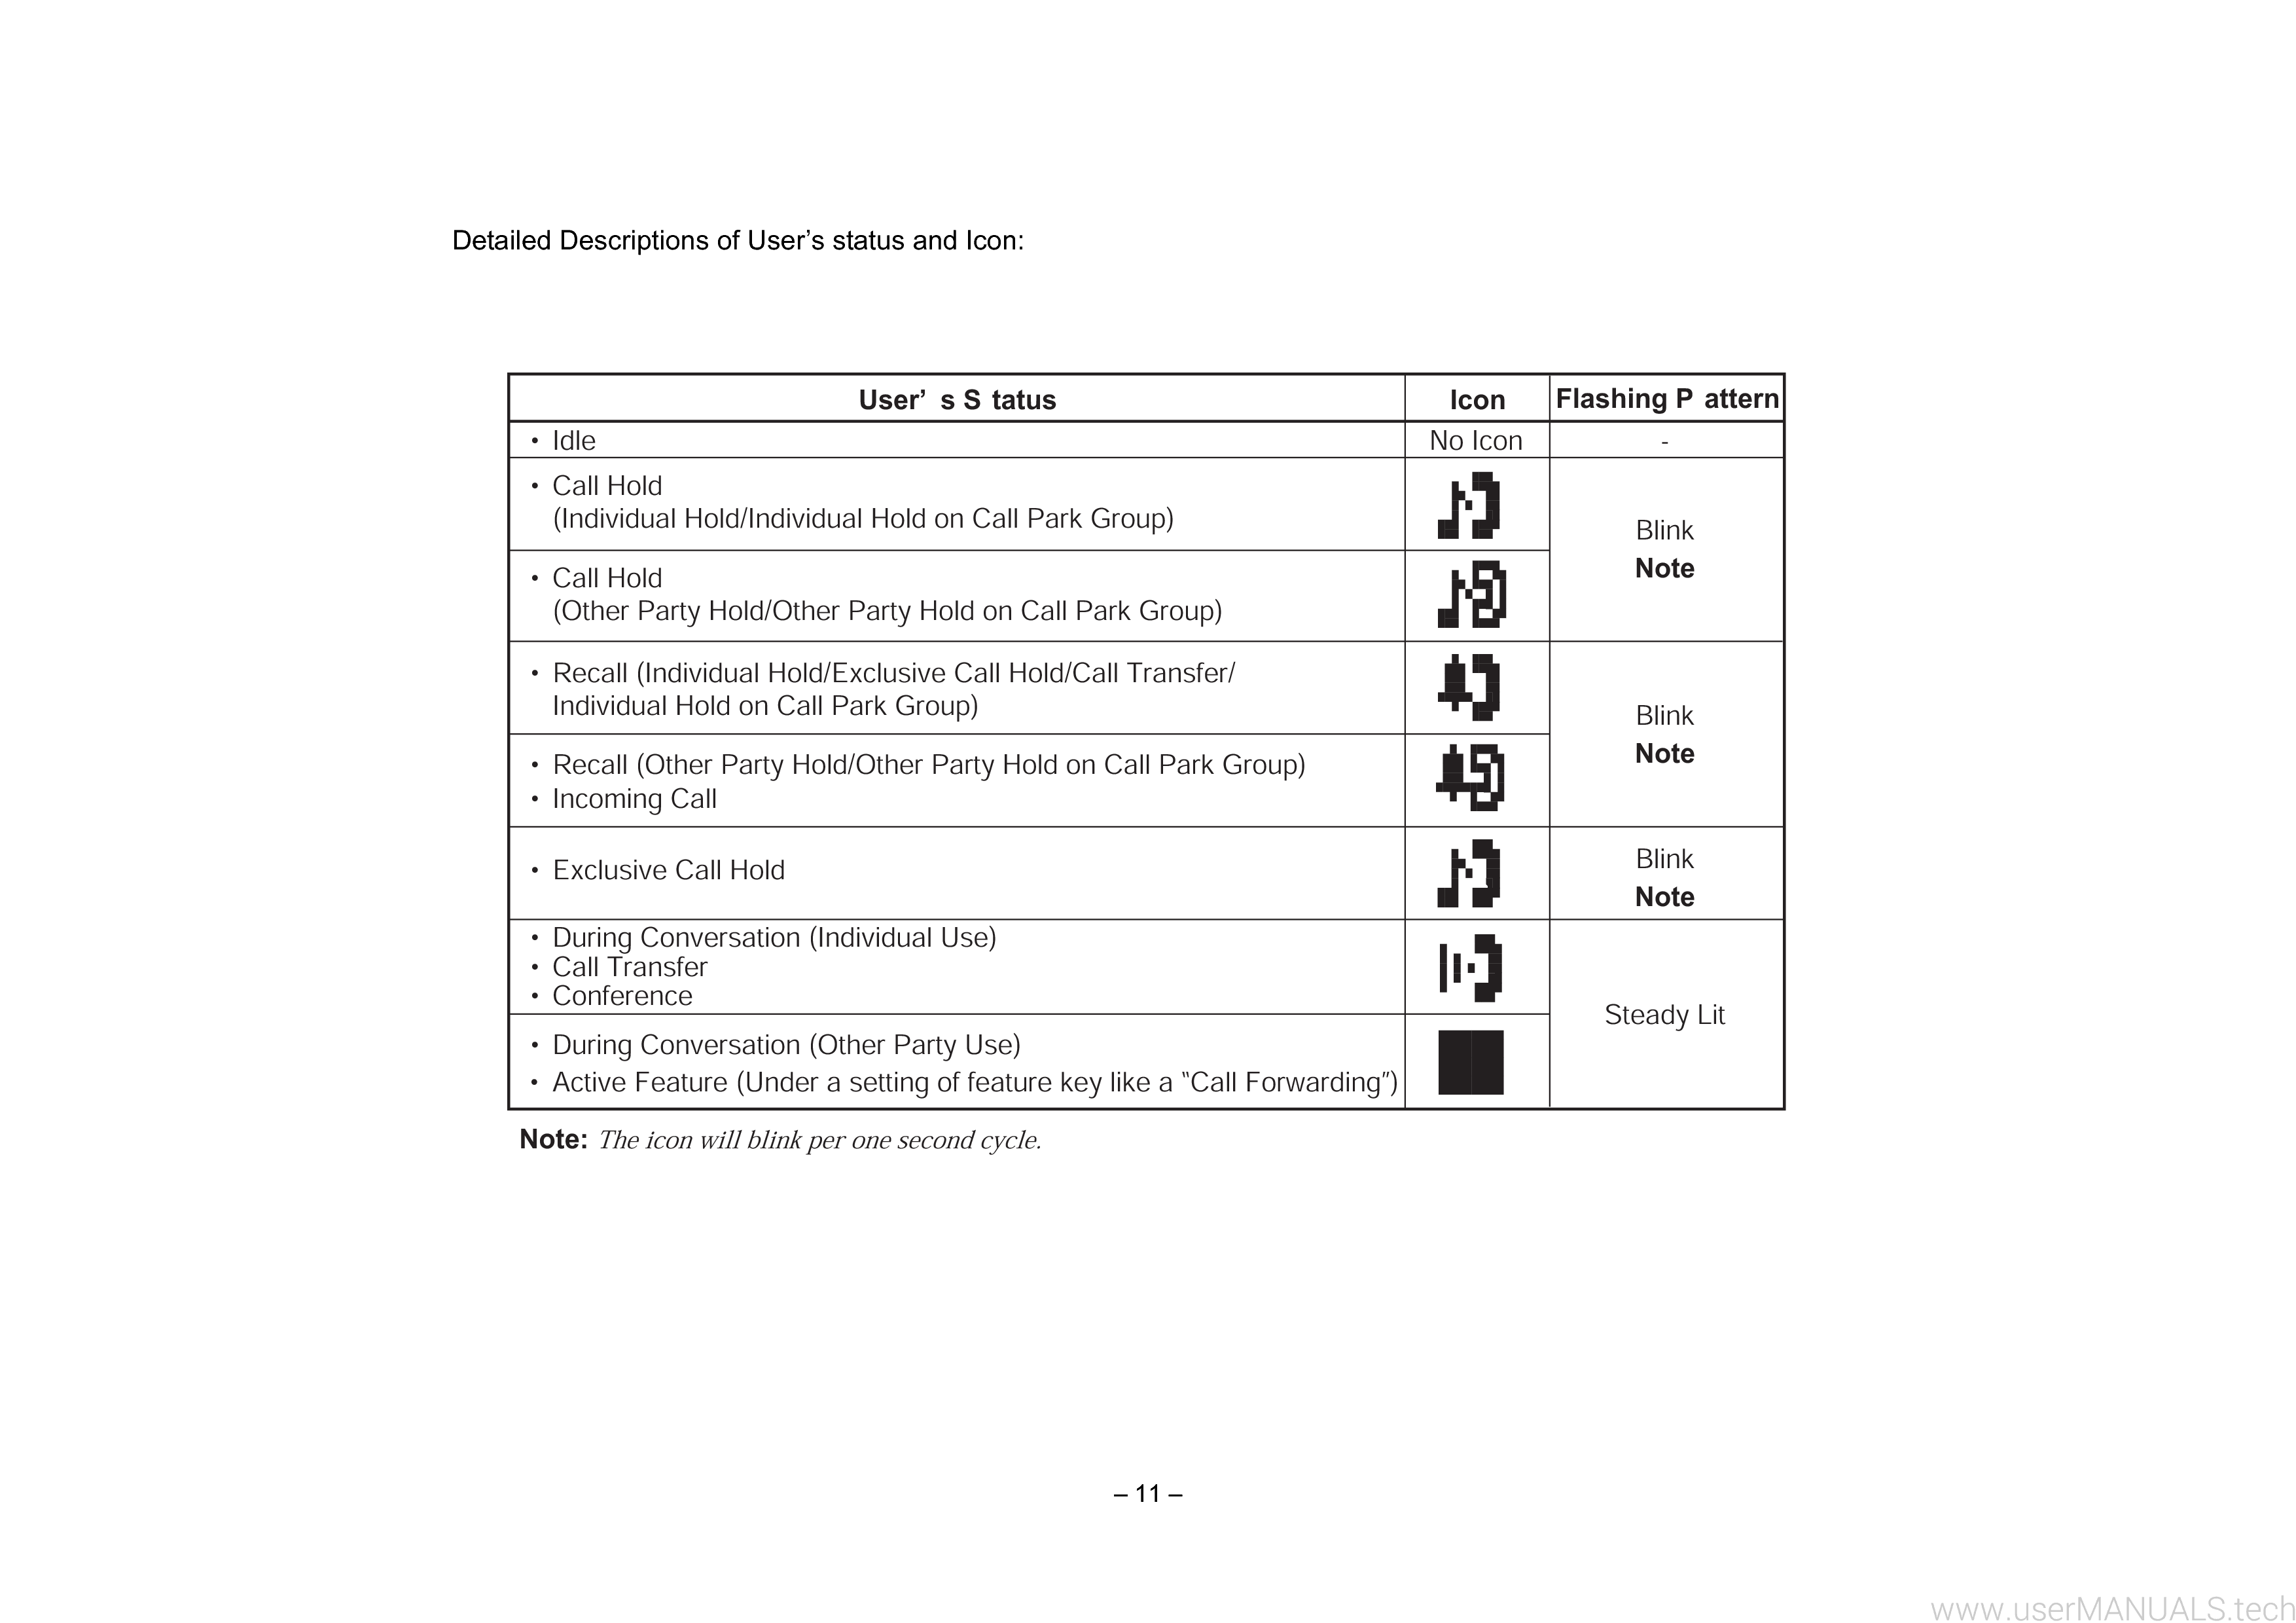 NEC Dterm Series 1 Manual, Page: 2